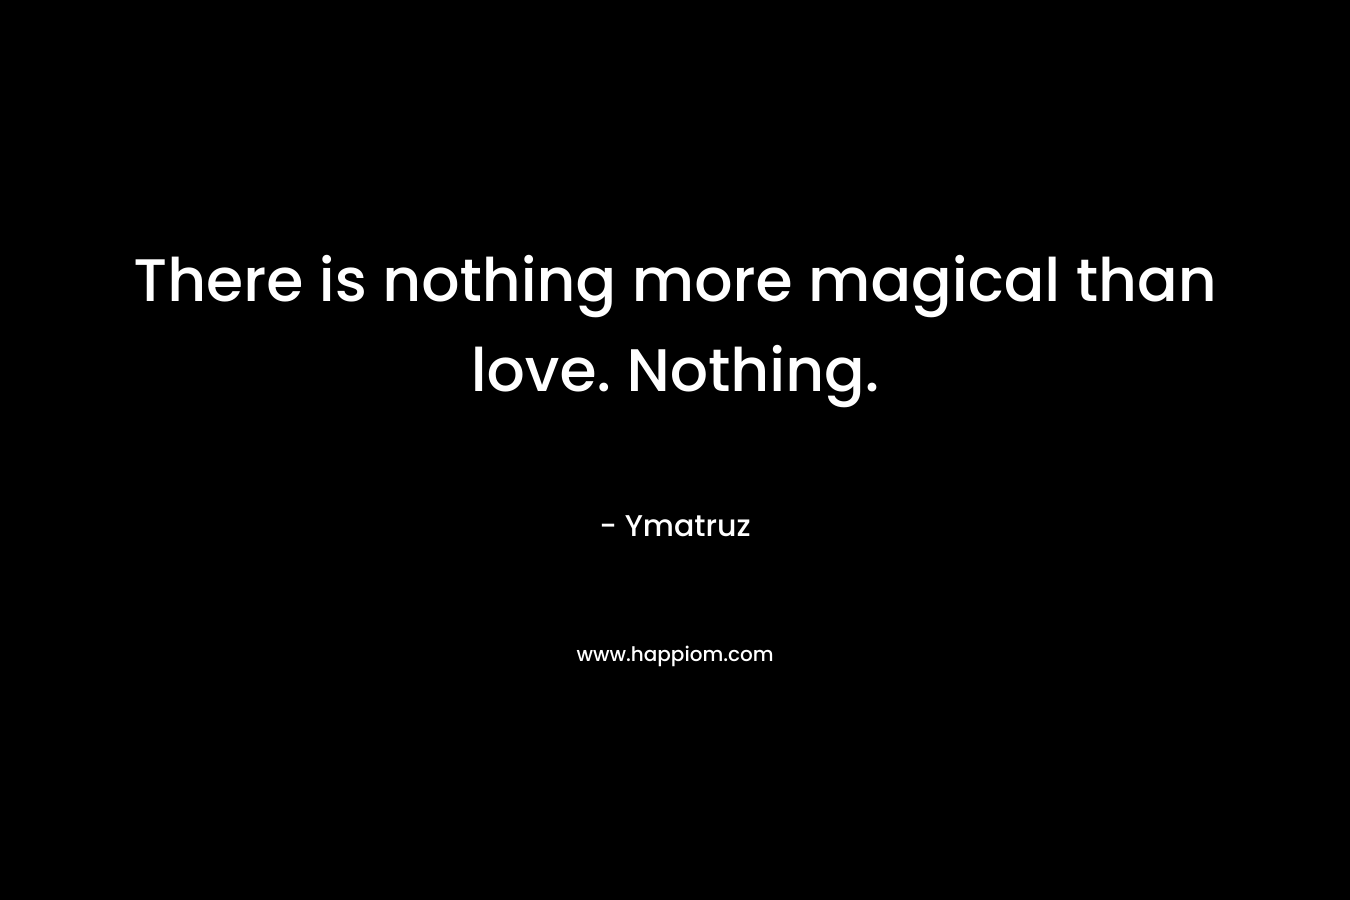 There is nothing more magical than love. Nothing.